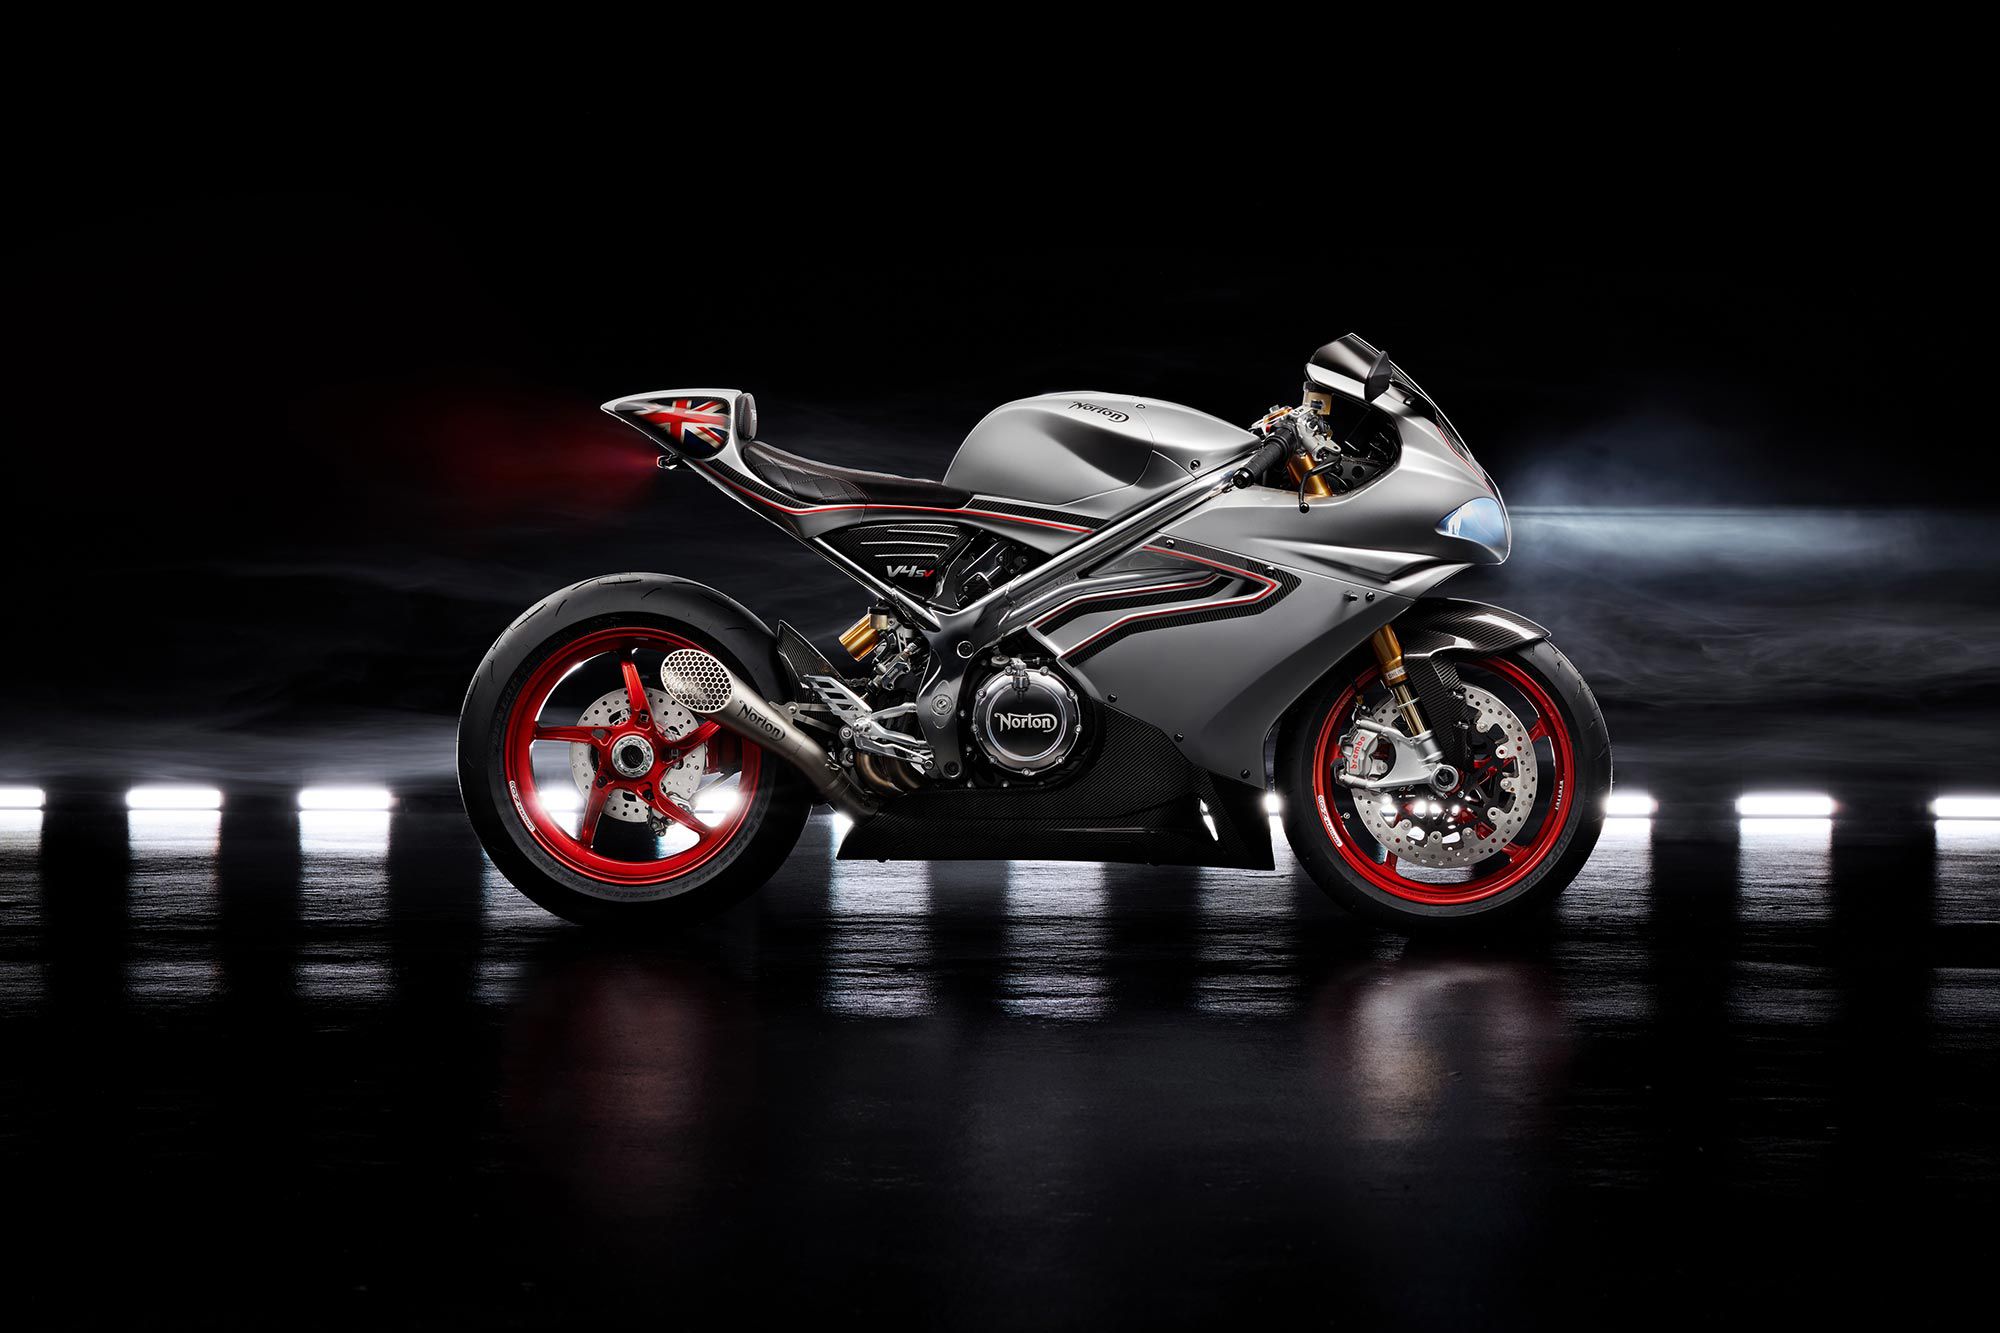 Will the TVS Motors-owned Norton Motorcycle be able to right the ship with its new V4SV superbike?